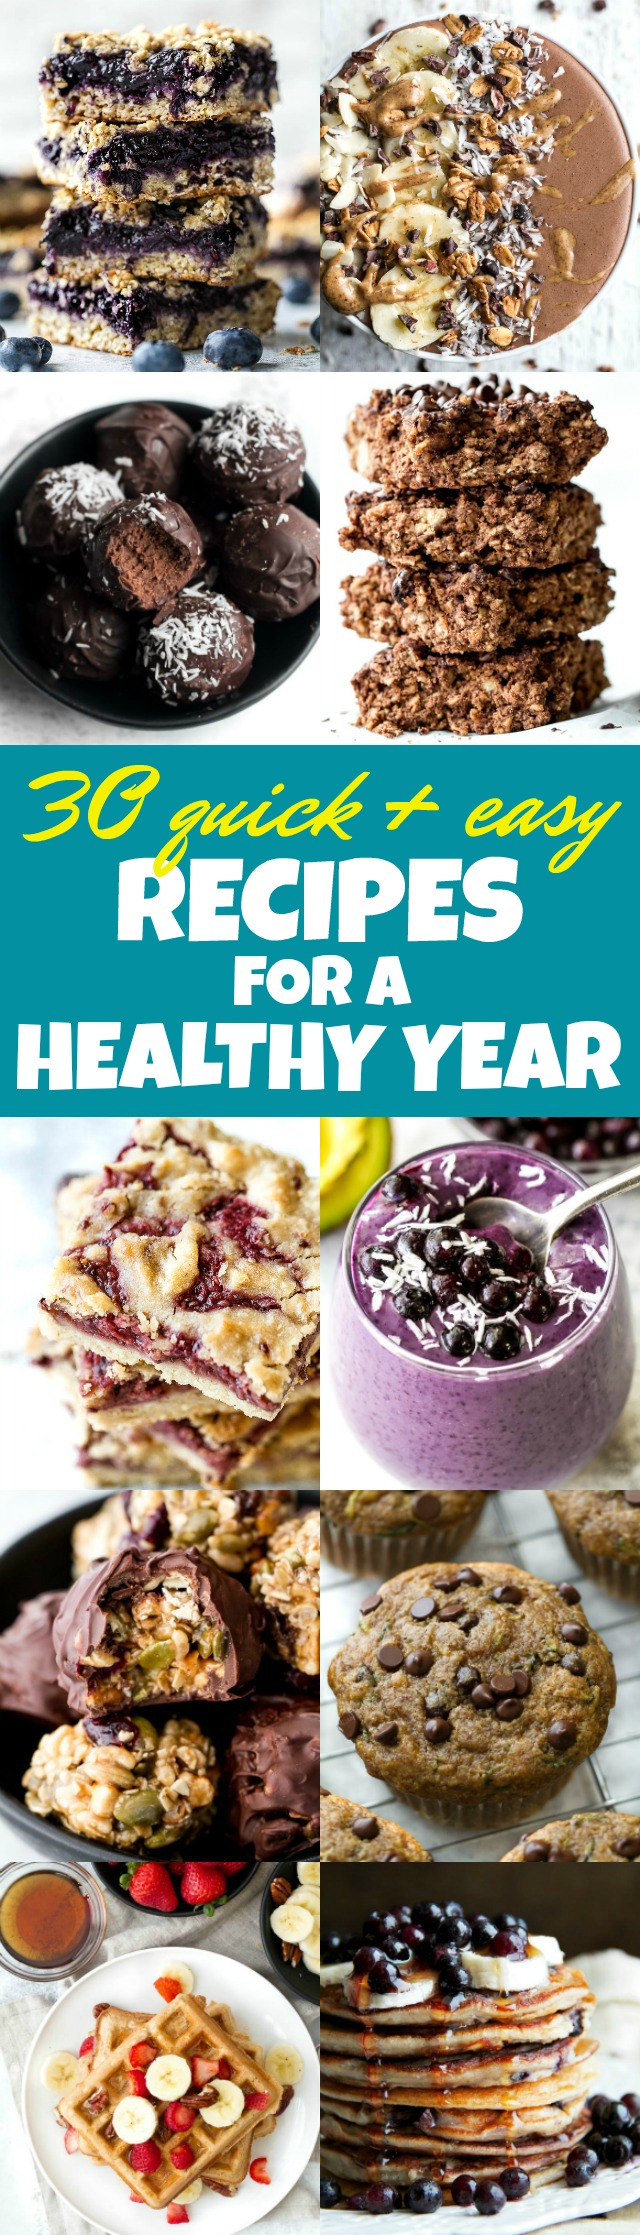 30 Quick & Easy Recipes you can (and totally should!) make this year to help you achieve your health goals! Lots of gluten-free and vegan options for breakfasts and snacks | runningwithspoons.com